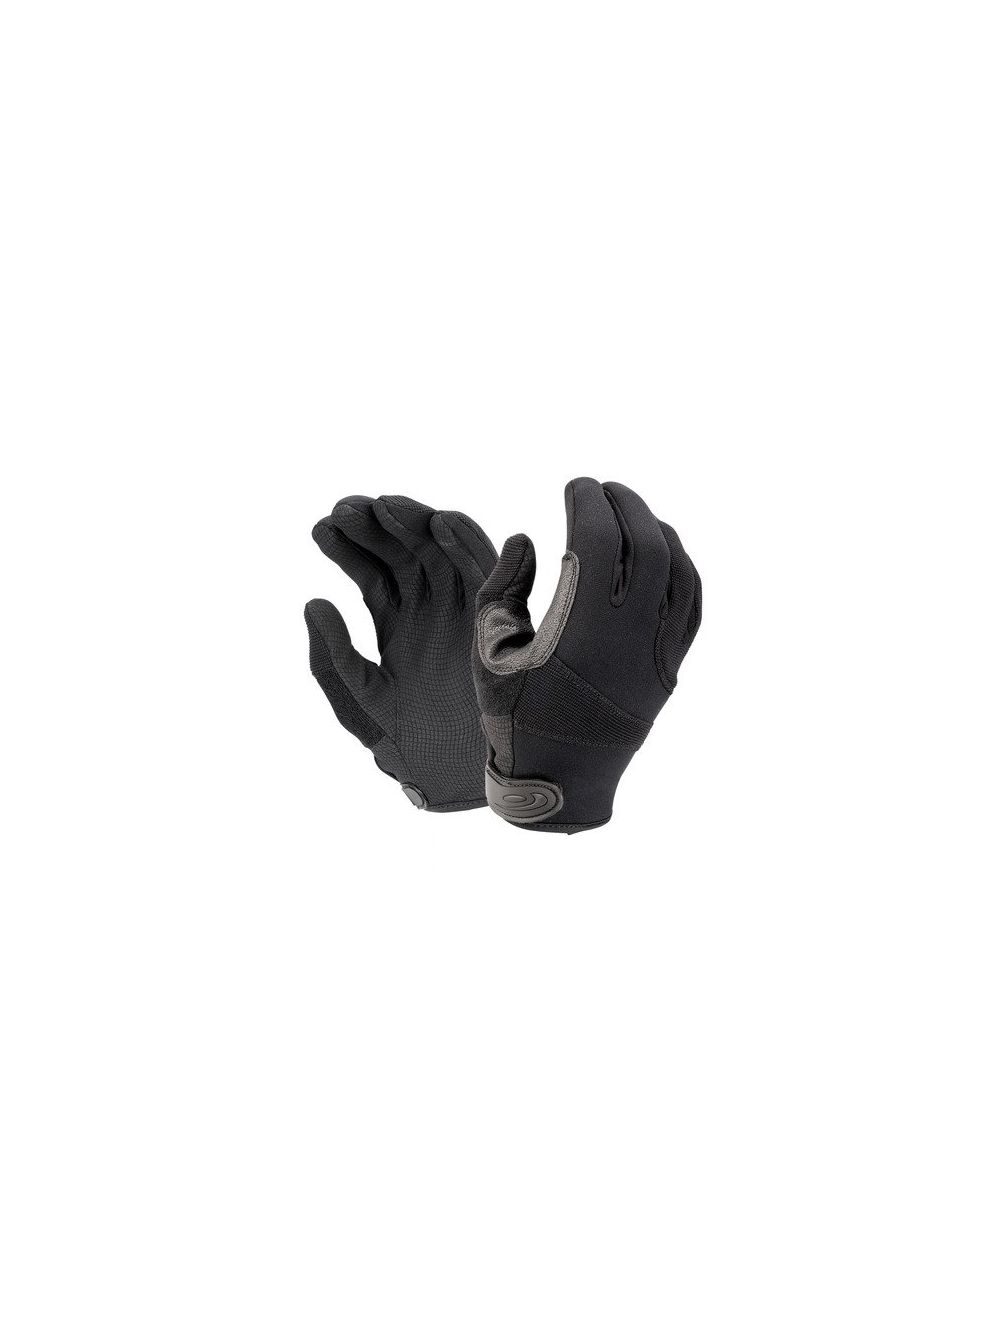 Street Guard Cut-Resistant Tactical Police Duty Glove